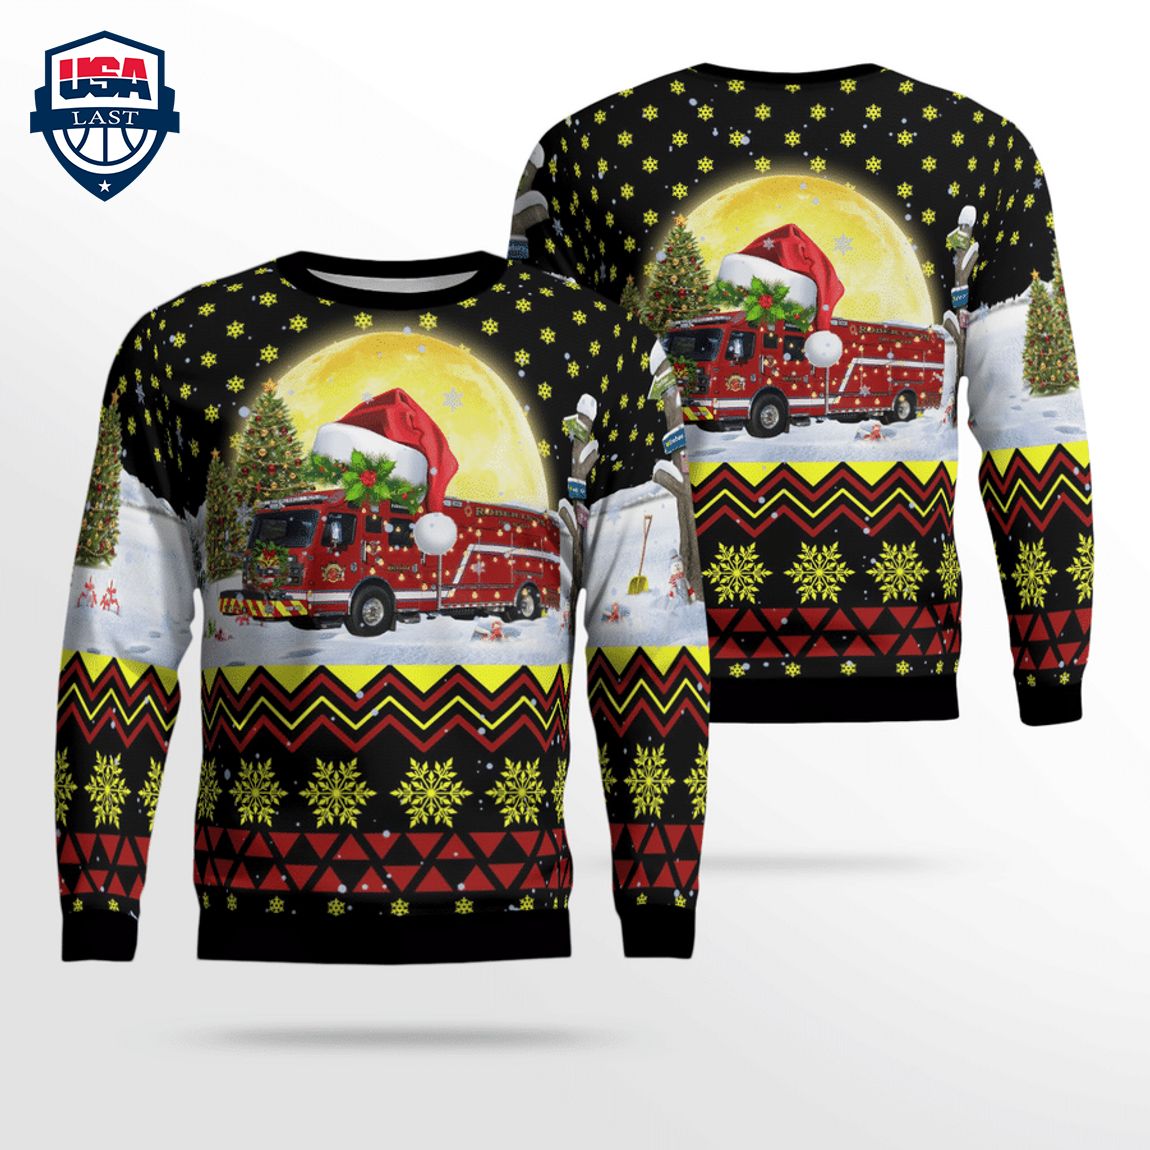 robertson-fire-protection-district-3d-christmas-sweater-1-3dnZ5.jpg